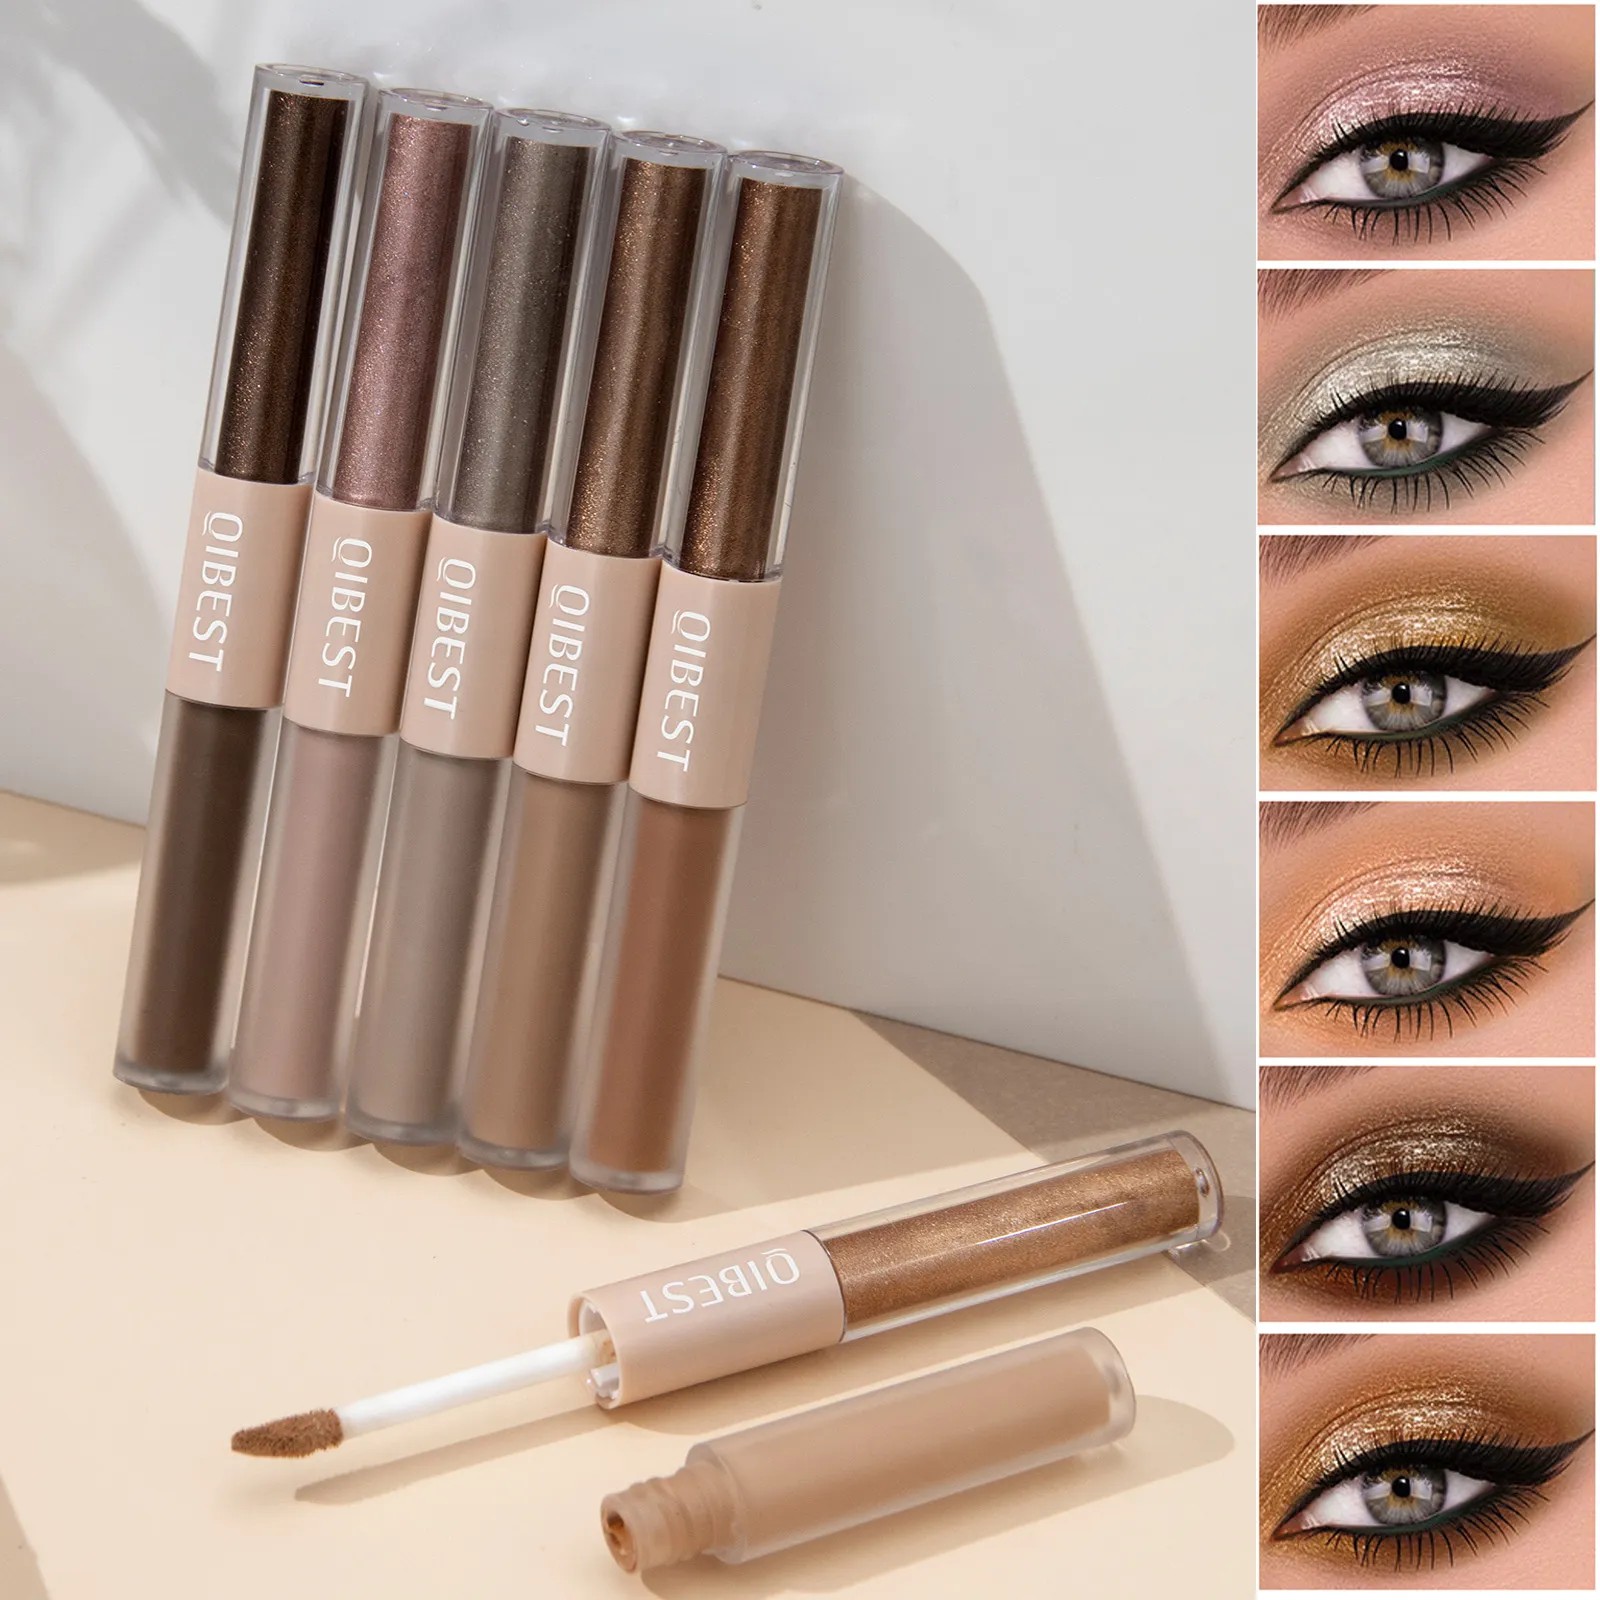 2 In 1 Stick Pearly Matte Eyeshadow Cream Smooth Nude Eye Makeup Liquid Contour Shadow Stick Waterproof Shimmer High Light Pen